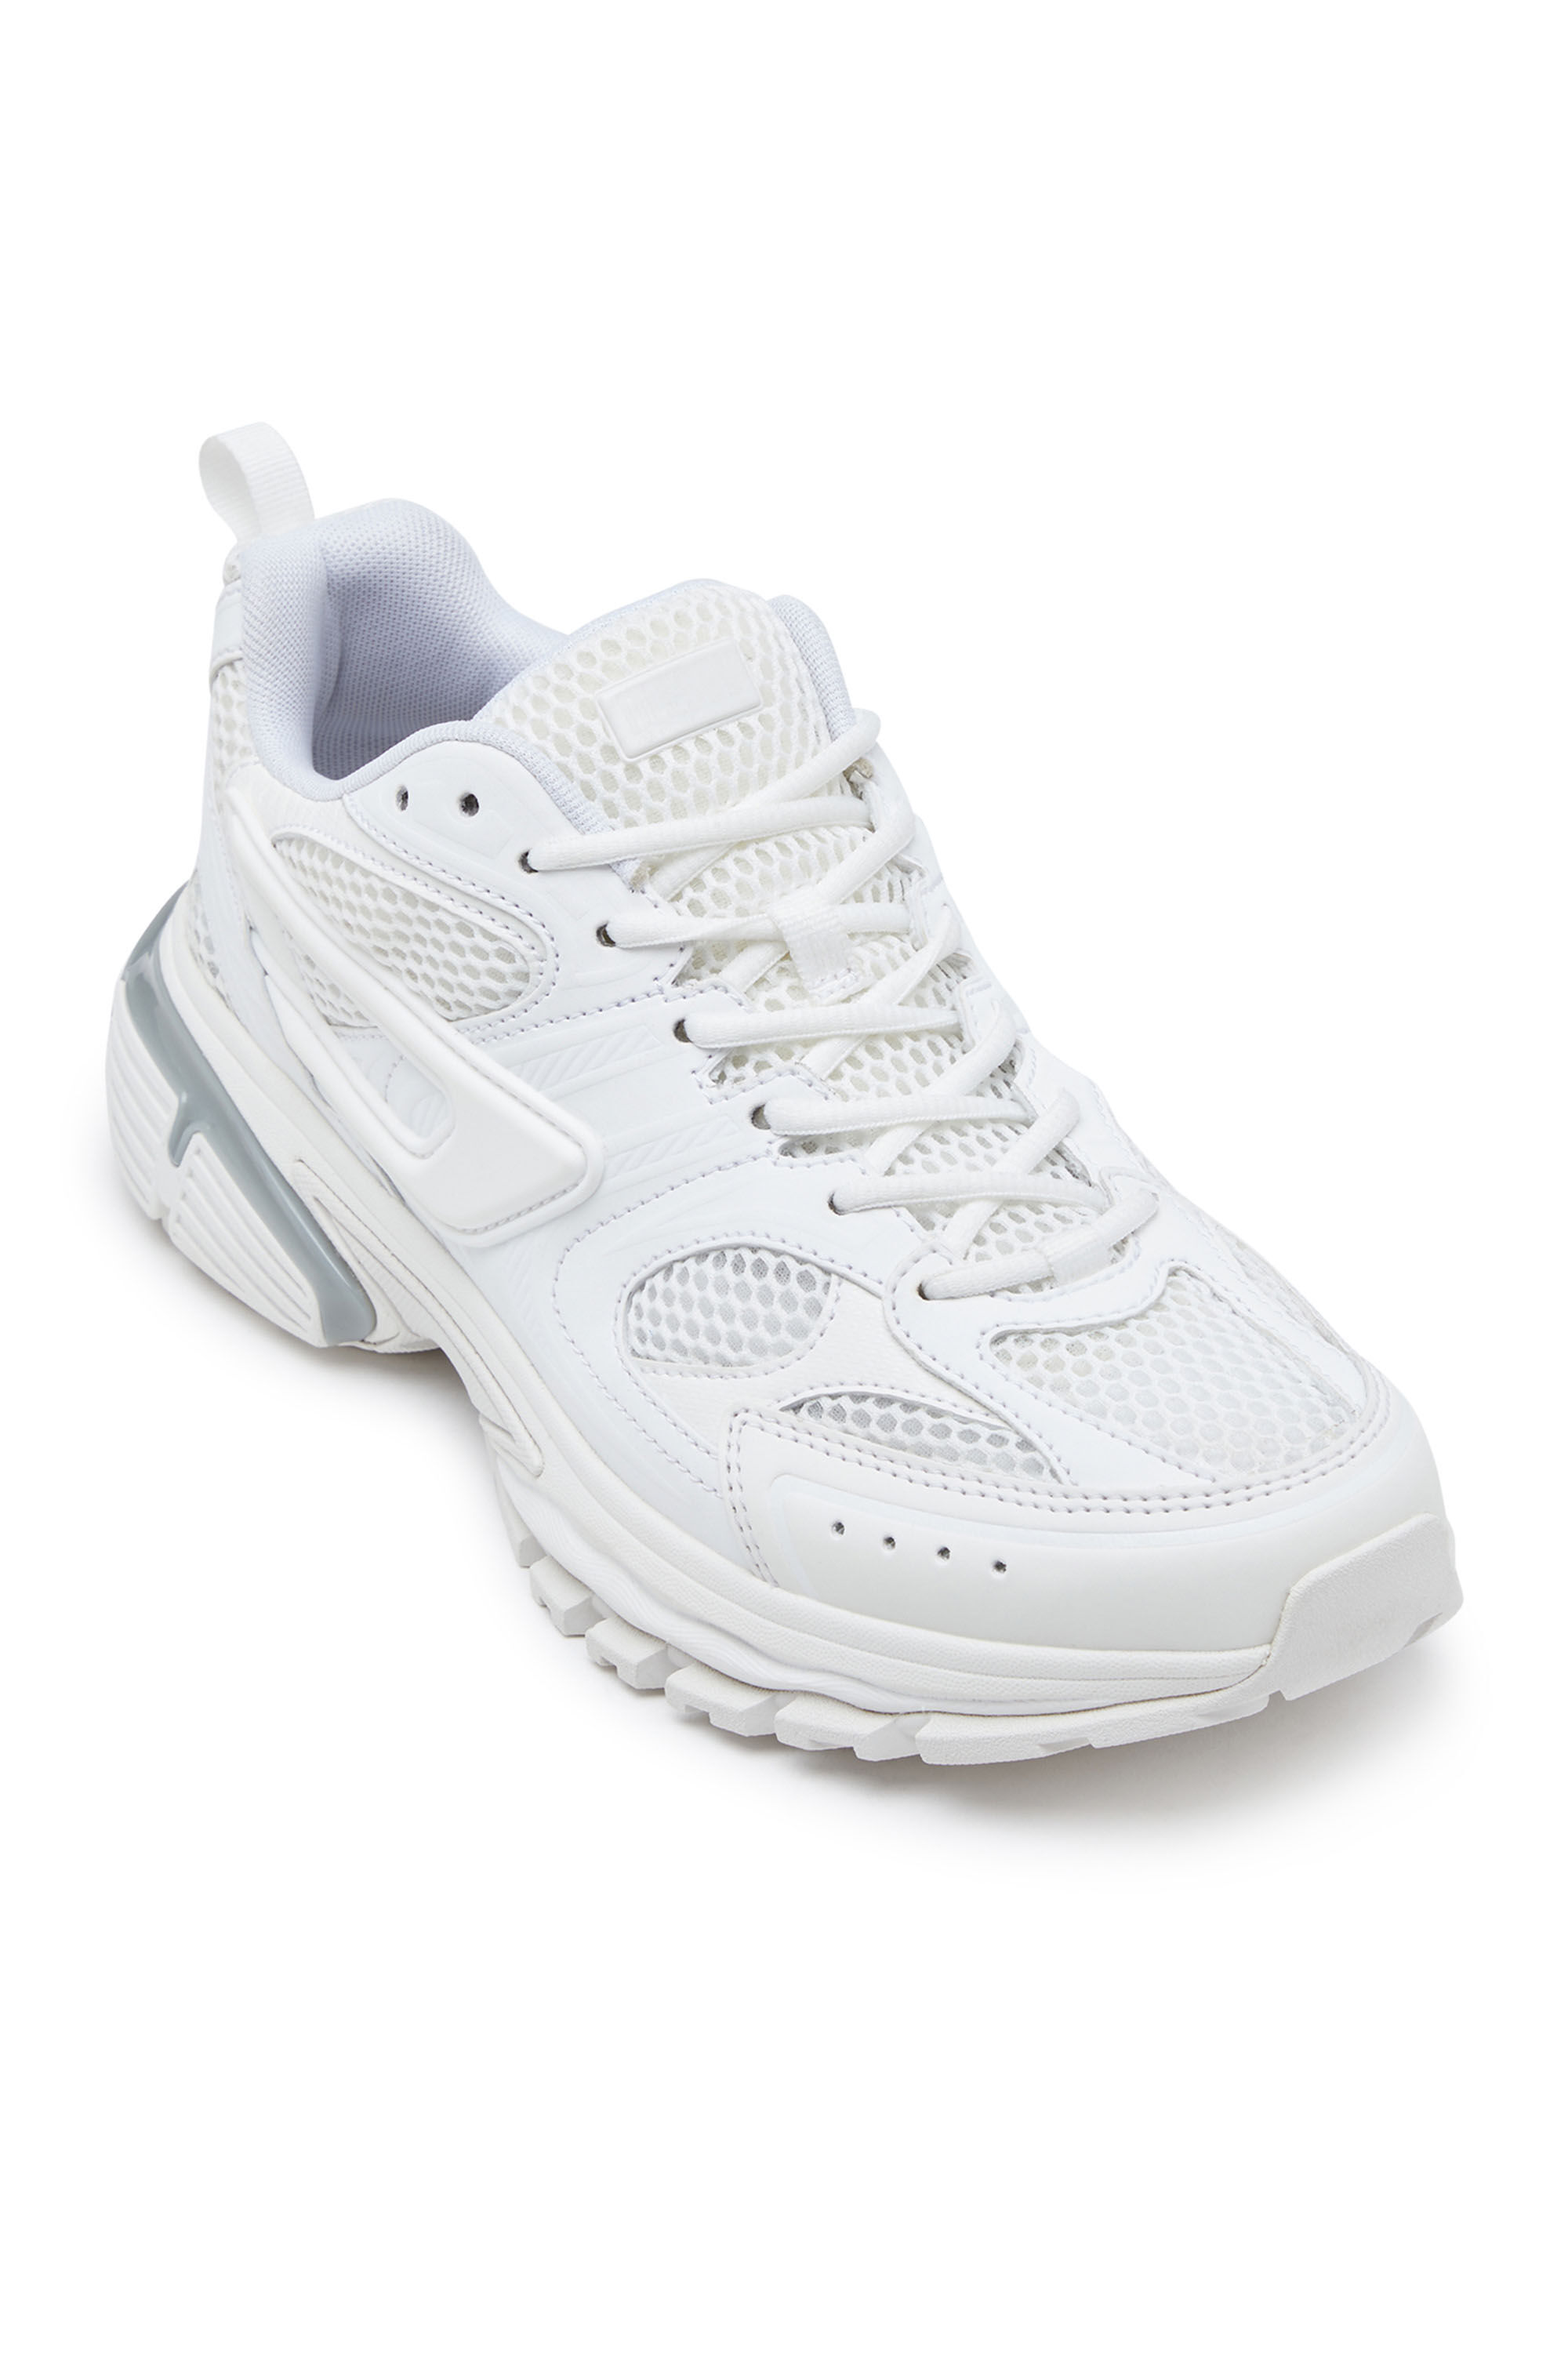 Diesel - S-SERENDIPITY PRO-X1 W, Woman S-Serendipity Pro-X1 W - Mesh sneakers with embossed overlays in White - Image 6